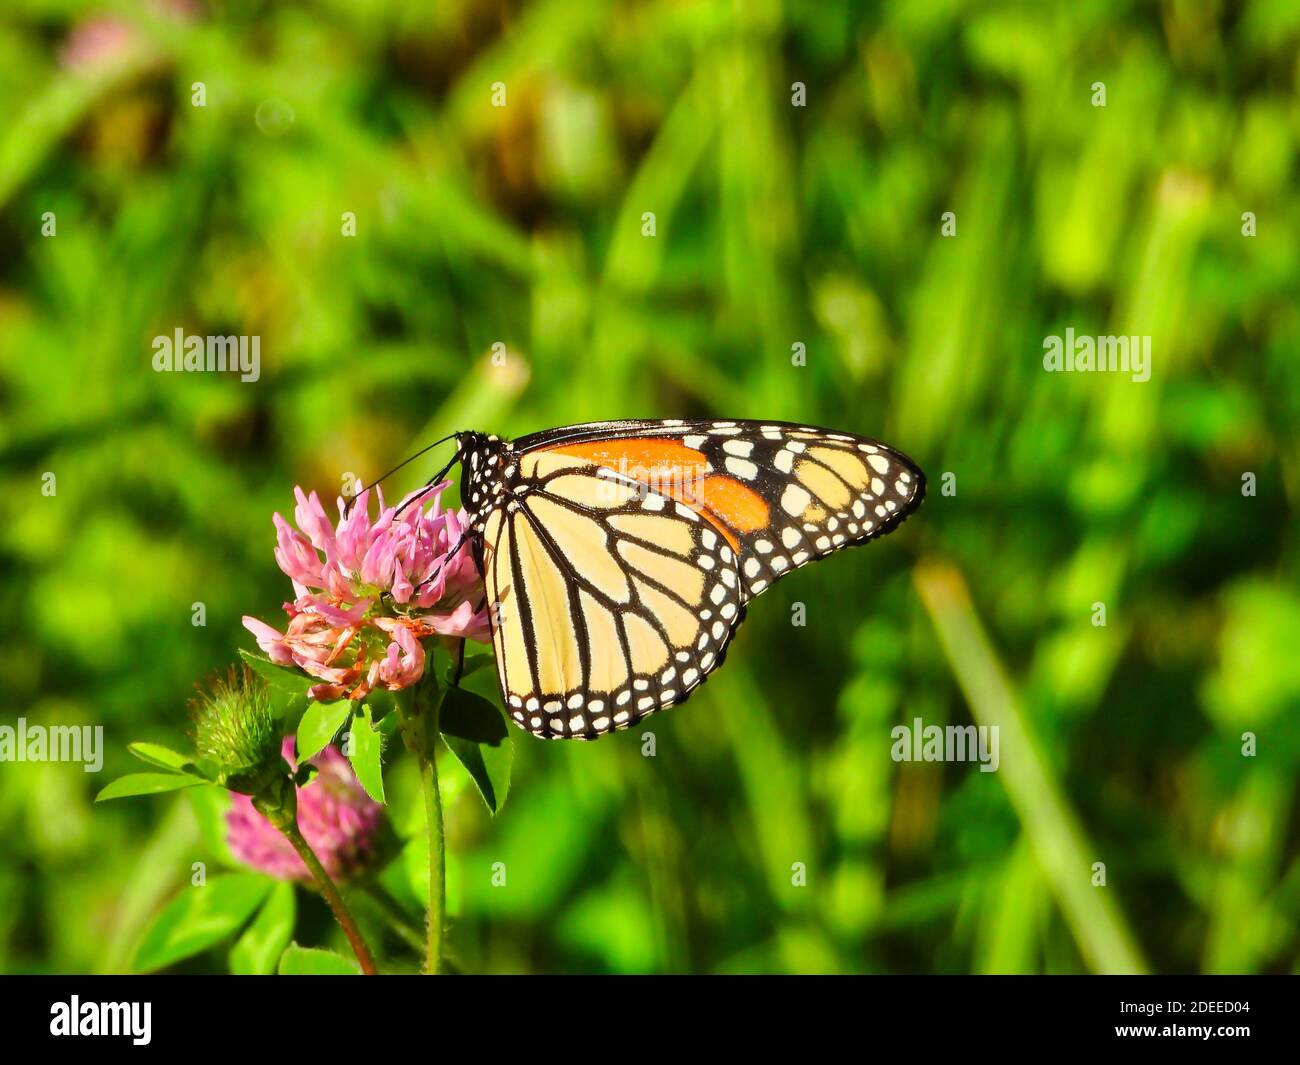 Monarch Butterfly Sits & Eats a Hot Pink Flower Showing Underside of Its Wing of Bright Yellow with Black Outline & White Spots & Top Side with Orange Stock Photo